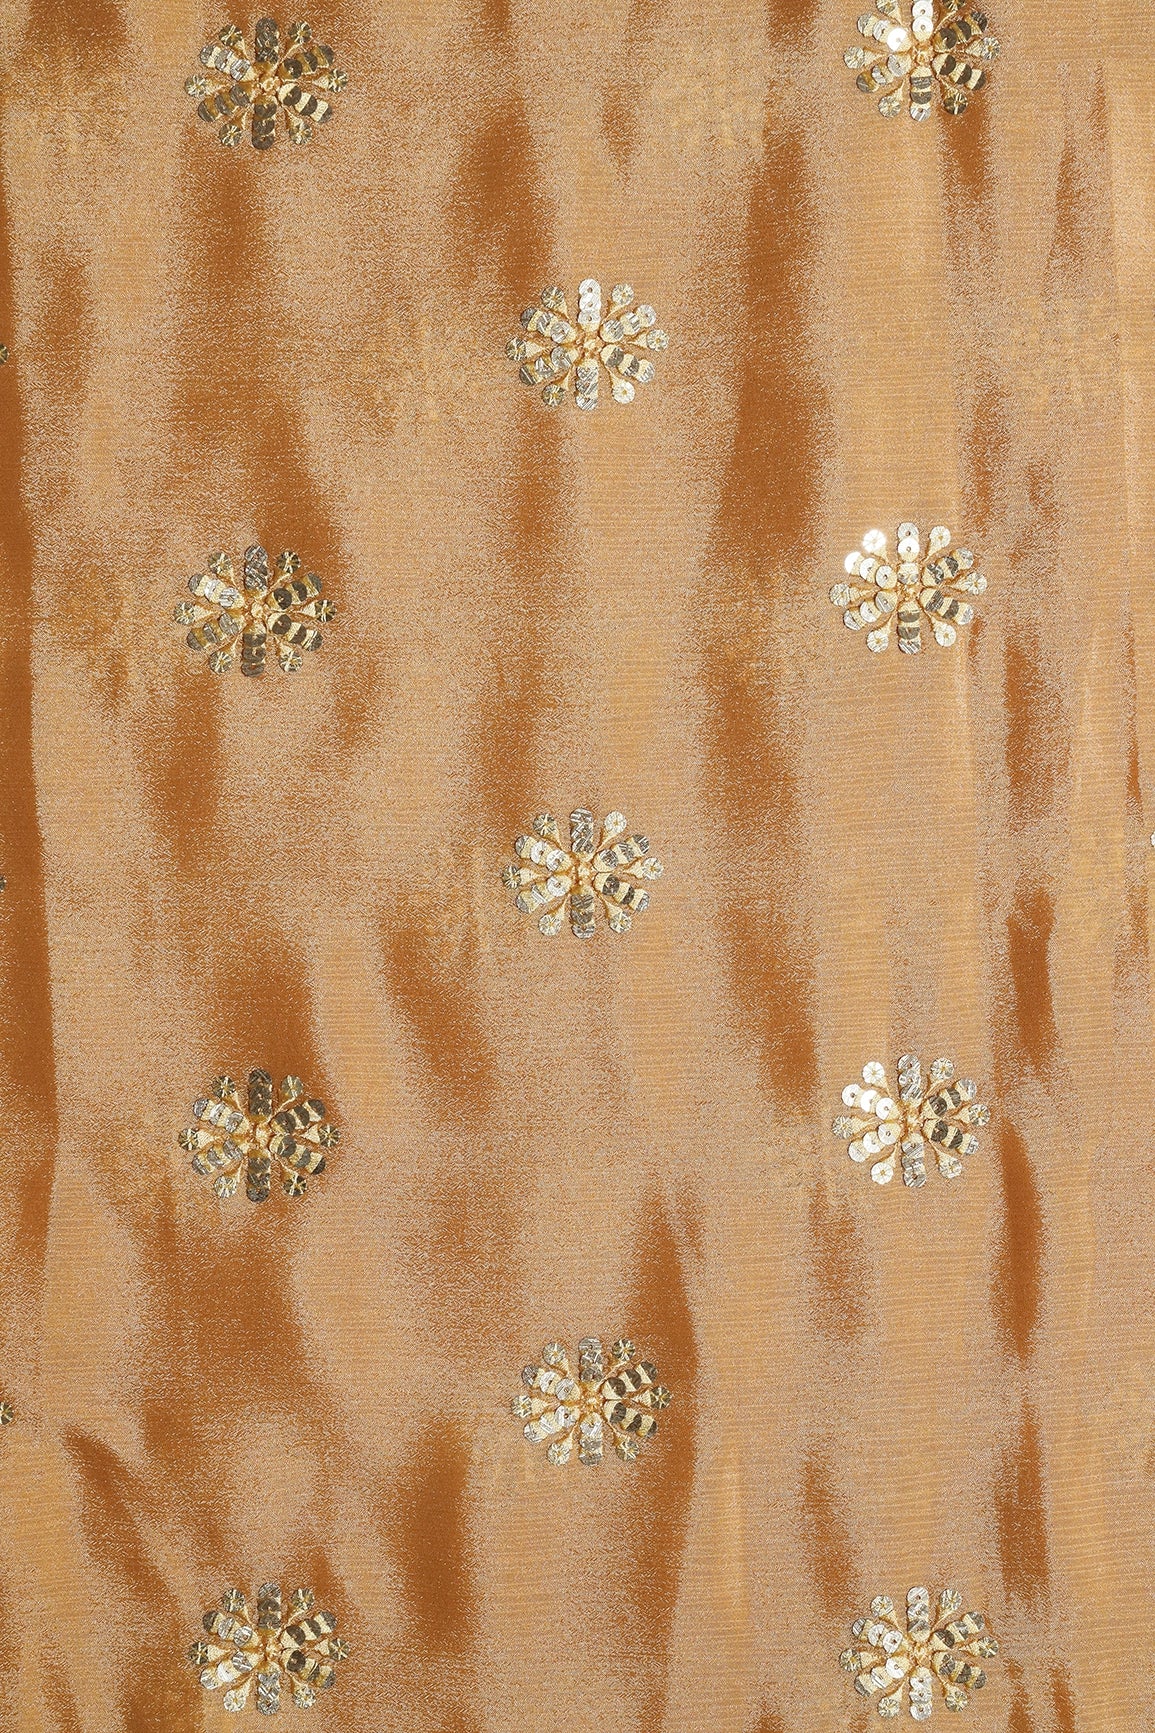 Beige Thread With Gold Sequins Floral Butta Embroidery Work On Beige Chinnon Chiffon Fabric